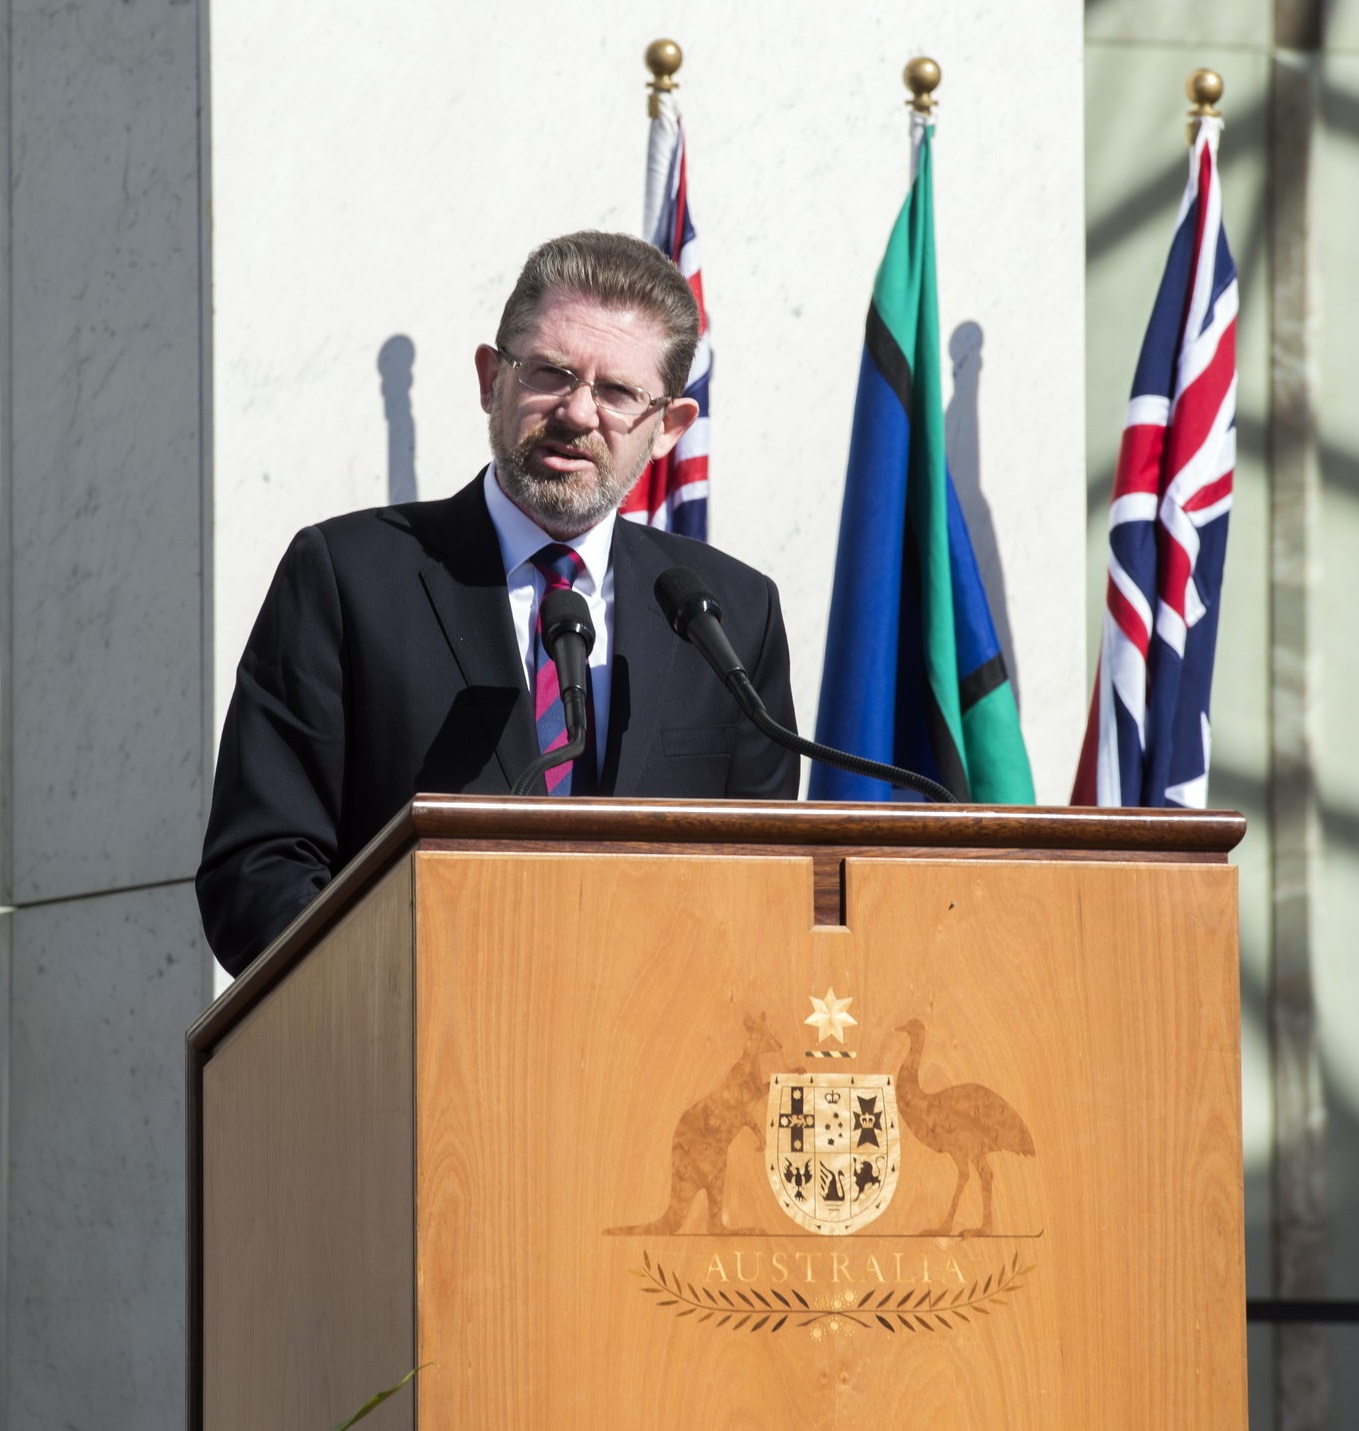 Speech – 30th Anniversary of the Official Opening of Parliament House